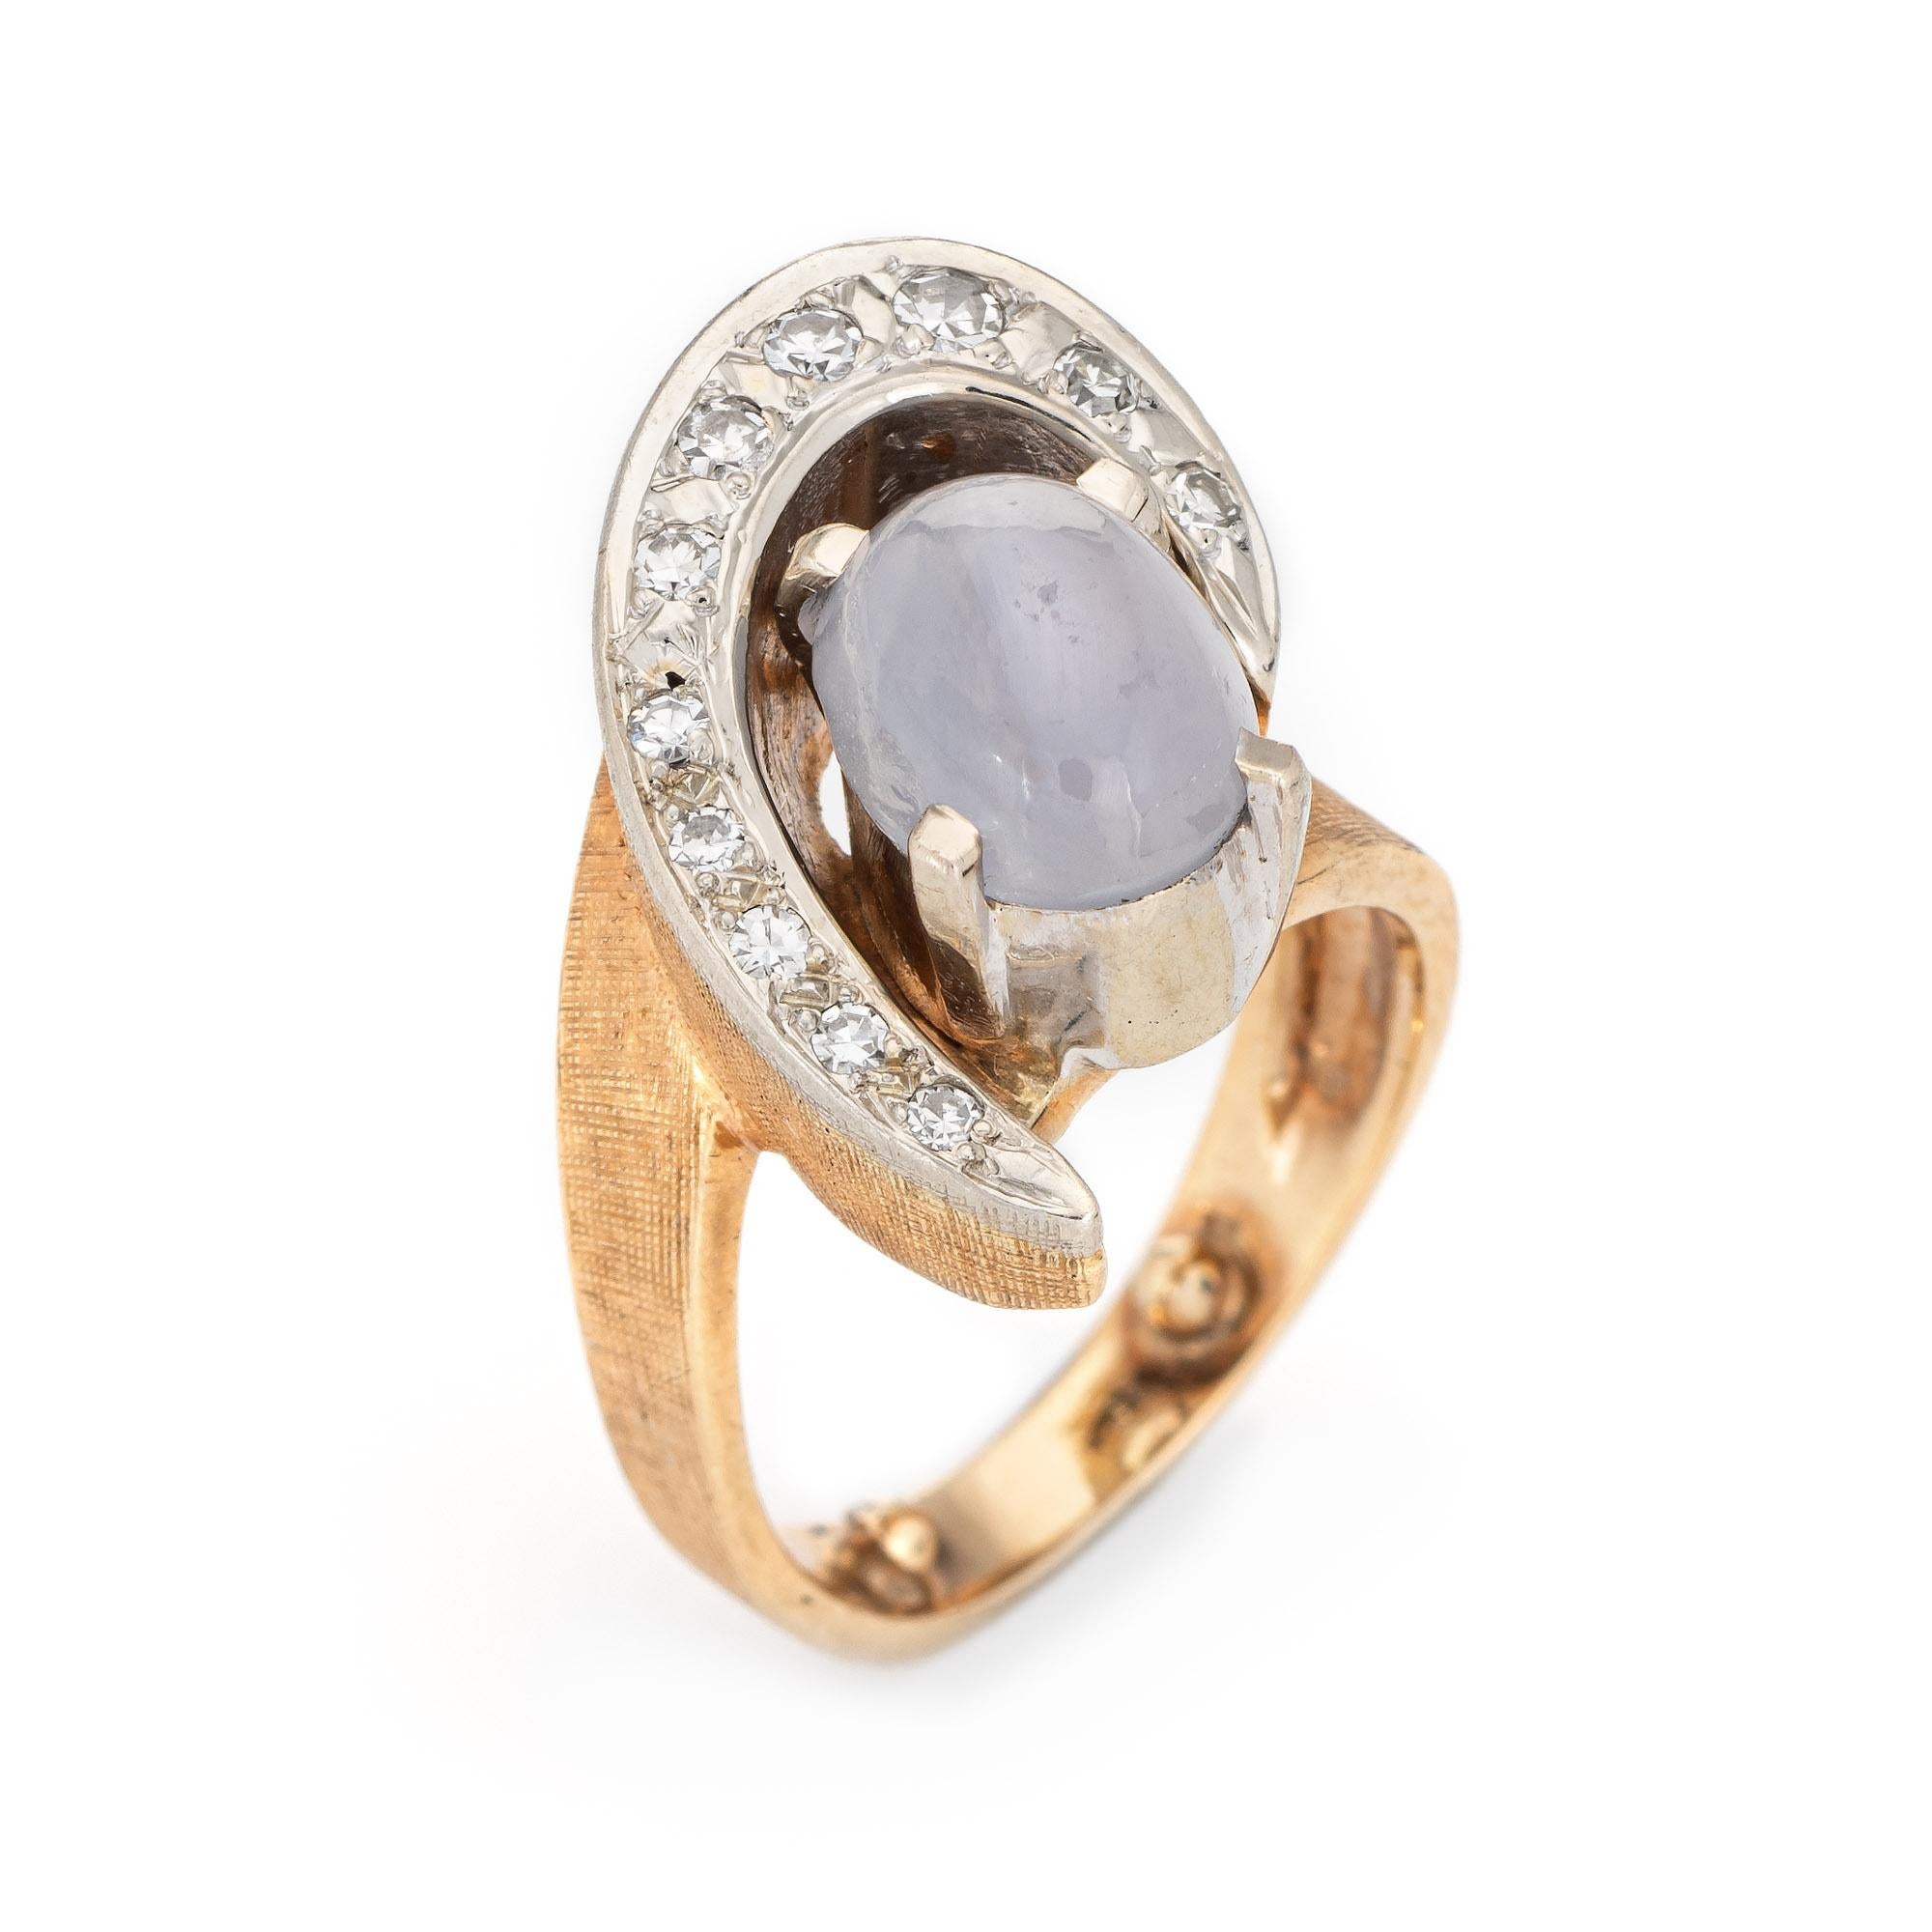 Stylish vintage natural star sapphire & diamond ring (circa 1960s) crafted in 14 karat yellow gold. 

Cabochon star sapphire measures 9.5mm x 5mm (estimated at 2.50 carats) accented with an estimated 0.15 carats of diamonds (estimated at G-H color